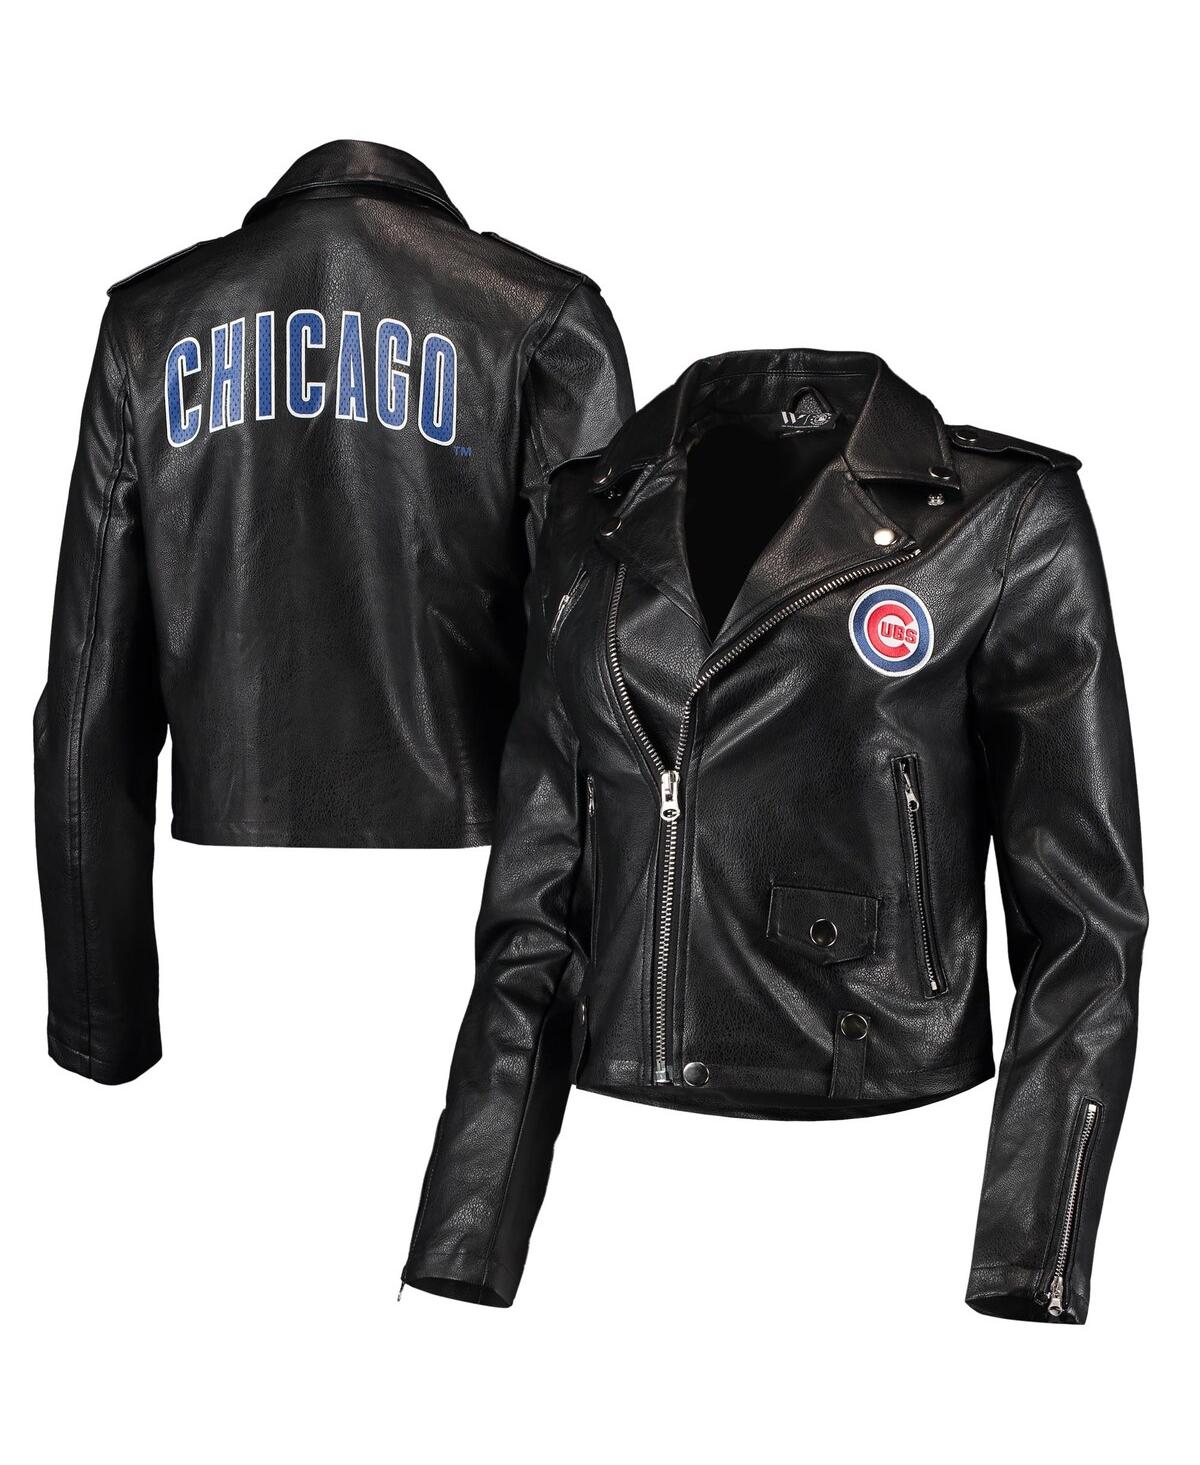 Women's The Wild Collective Black Chicago Cubs Faux Leather Moto Full-Zip Jacket - Black